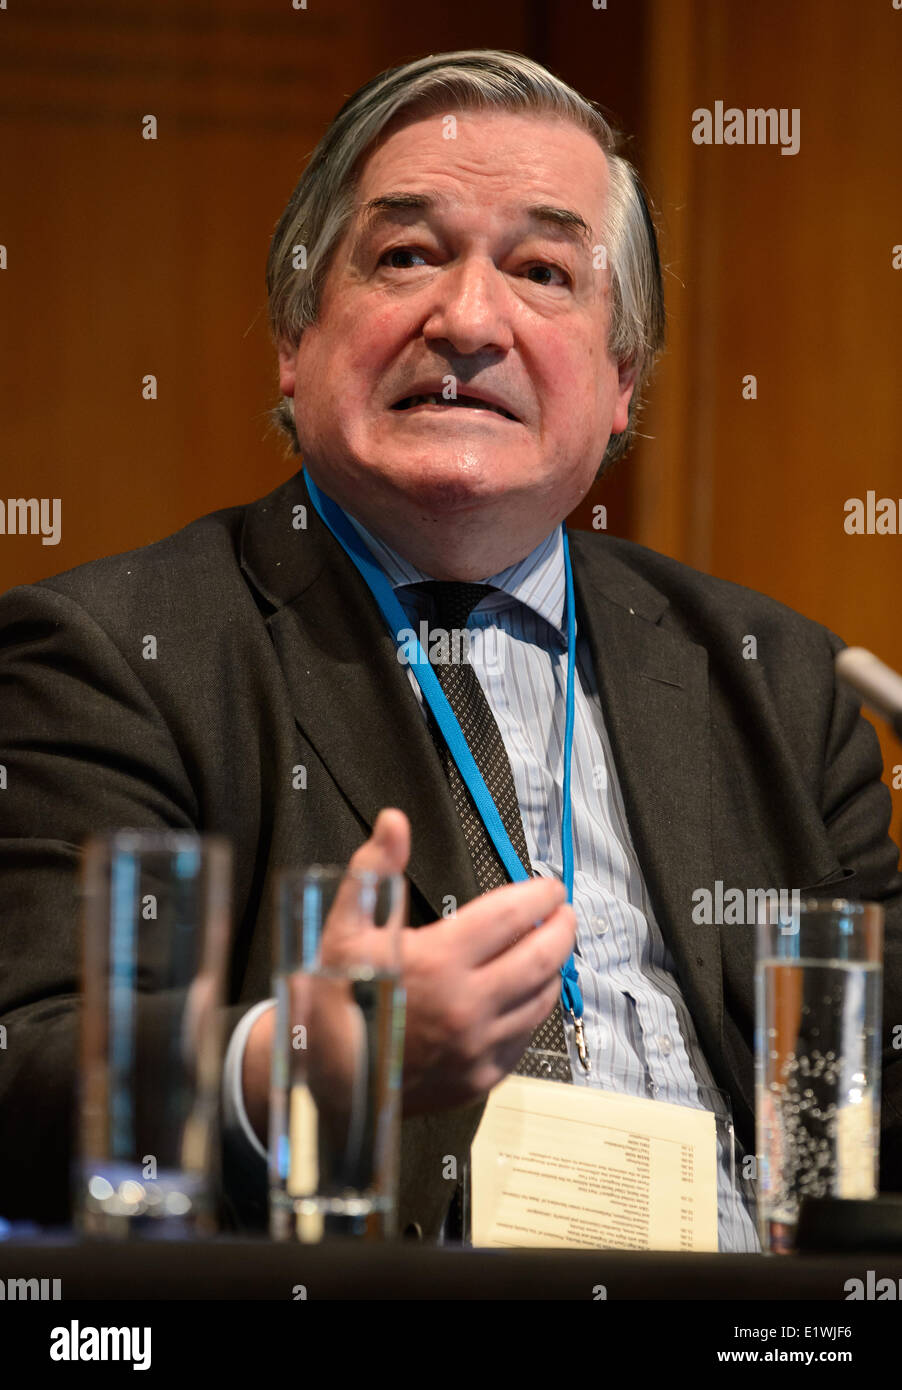 The Right Honourable Sir James Munby, President of the High Court of England and Wales speaking at the British Association of Social Workers (BASW) AGM and Conference in London. LSO, Jerwood Hall, London. 10th June 2014. Stock Photo